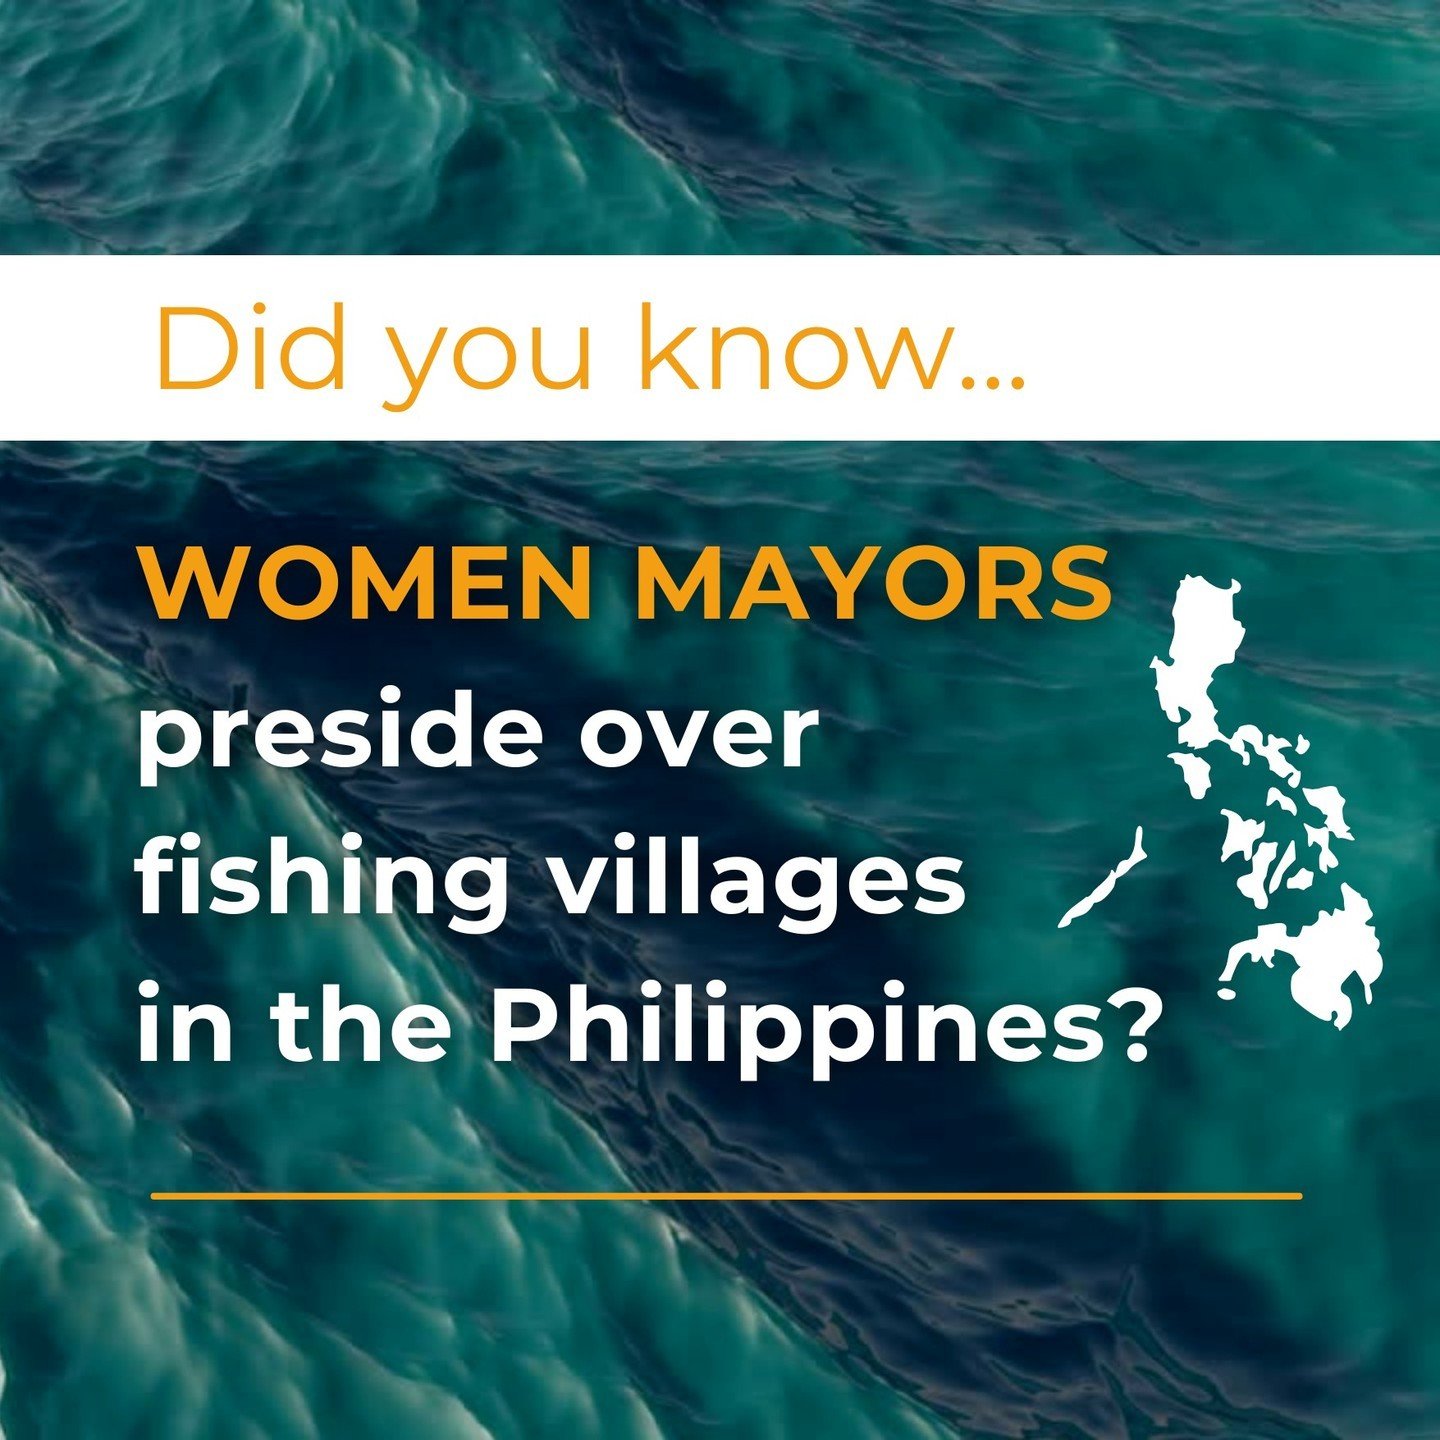 In the coastal areas of the Philippines, people have distinct gender roles similar to those in many African and Asian countries. ⁠
⁠
For example, in Batan Bay, women are prohibited from stepping onto fishing boats, which limits their access to fisher